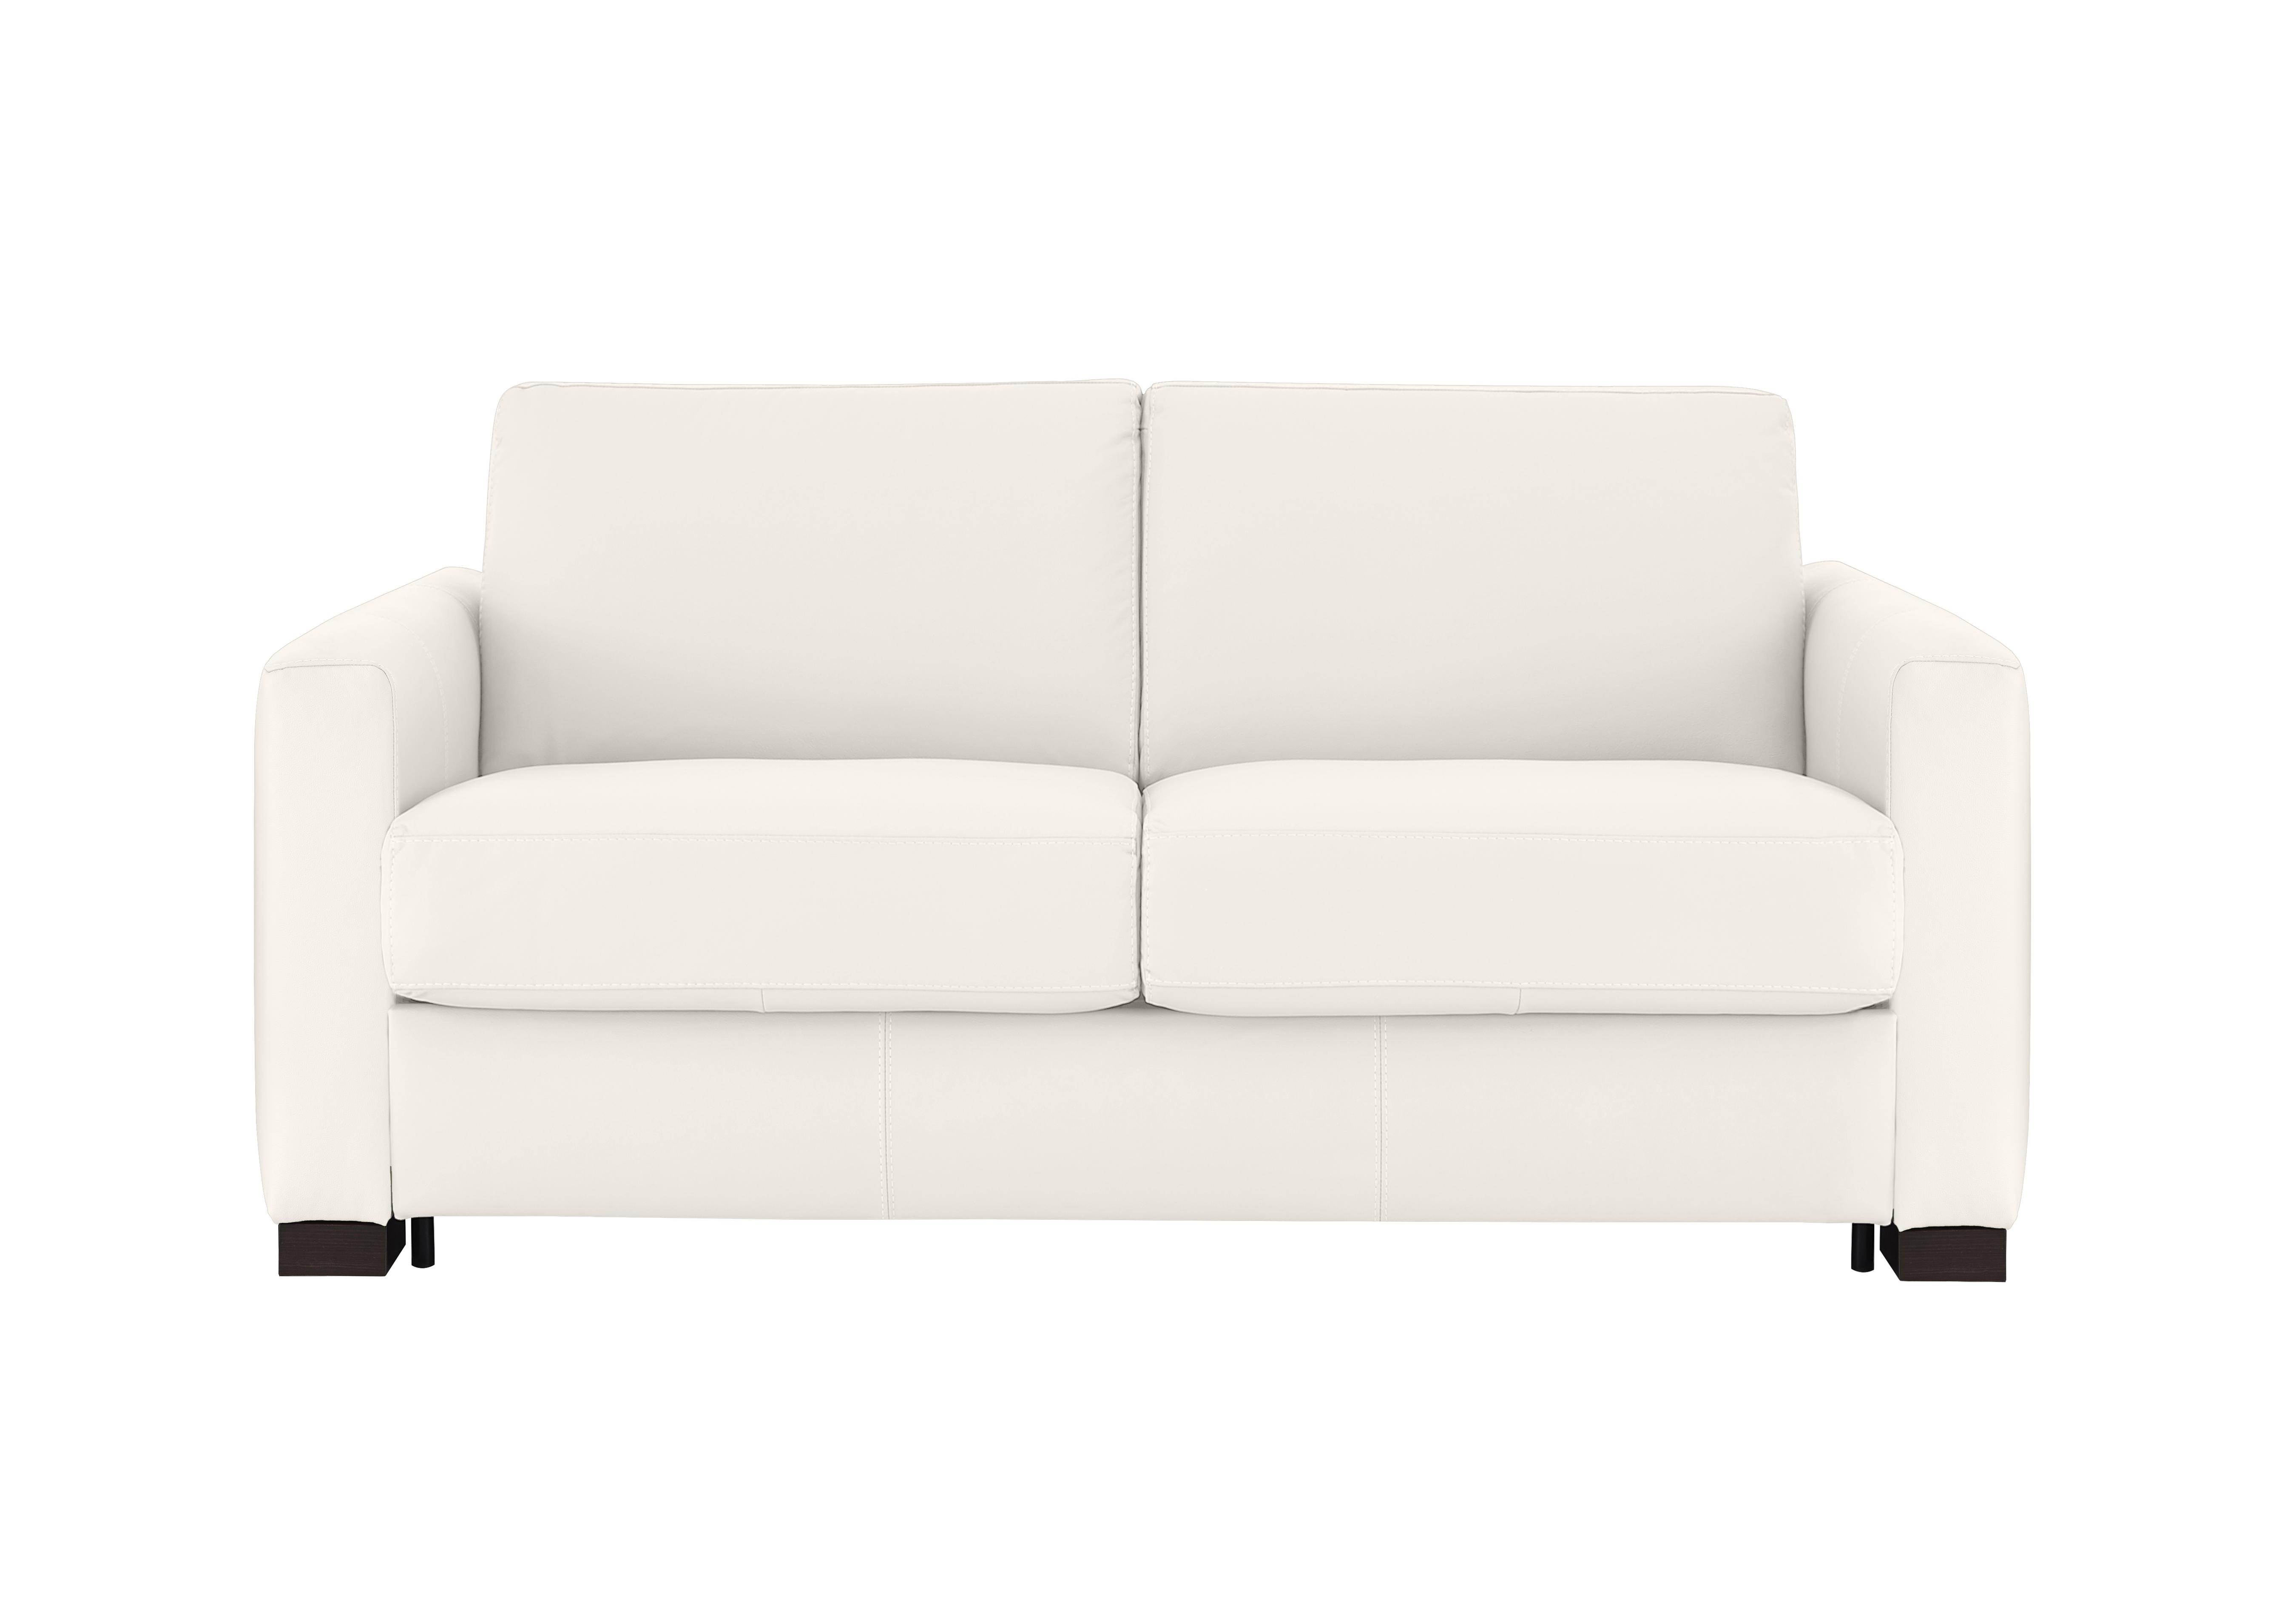 Alcova 2 Seater Leather Sofa Bed with Box Arms in Torello Bianco 93 on Furniture Village